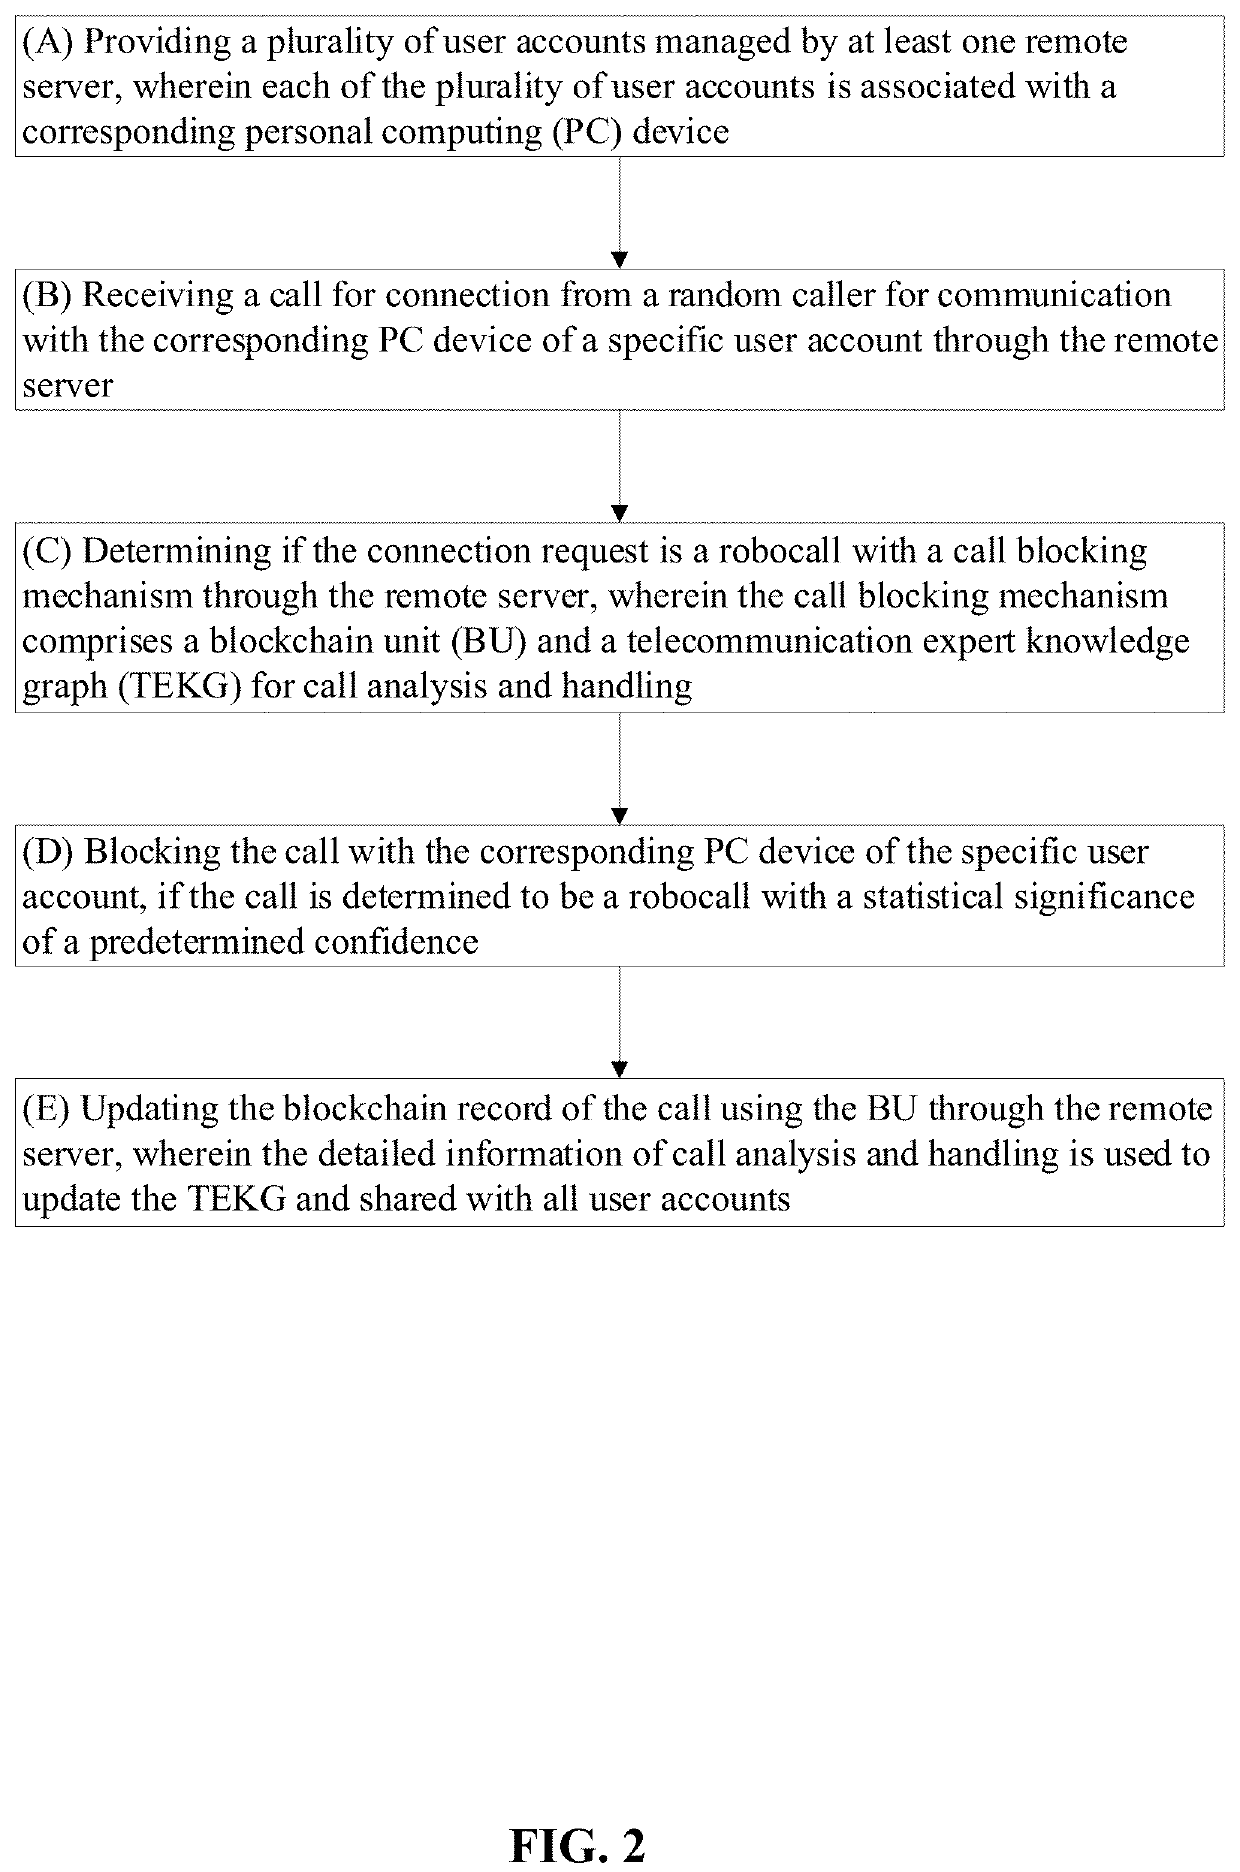 Methods and Systems for Detecting Disinformation and Blocking Robotic Calls